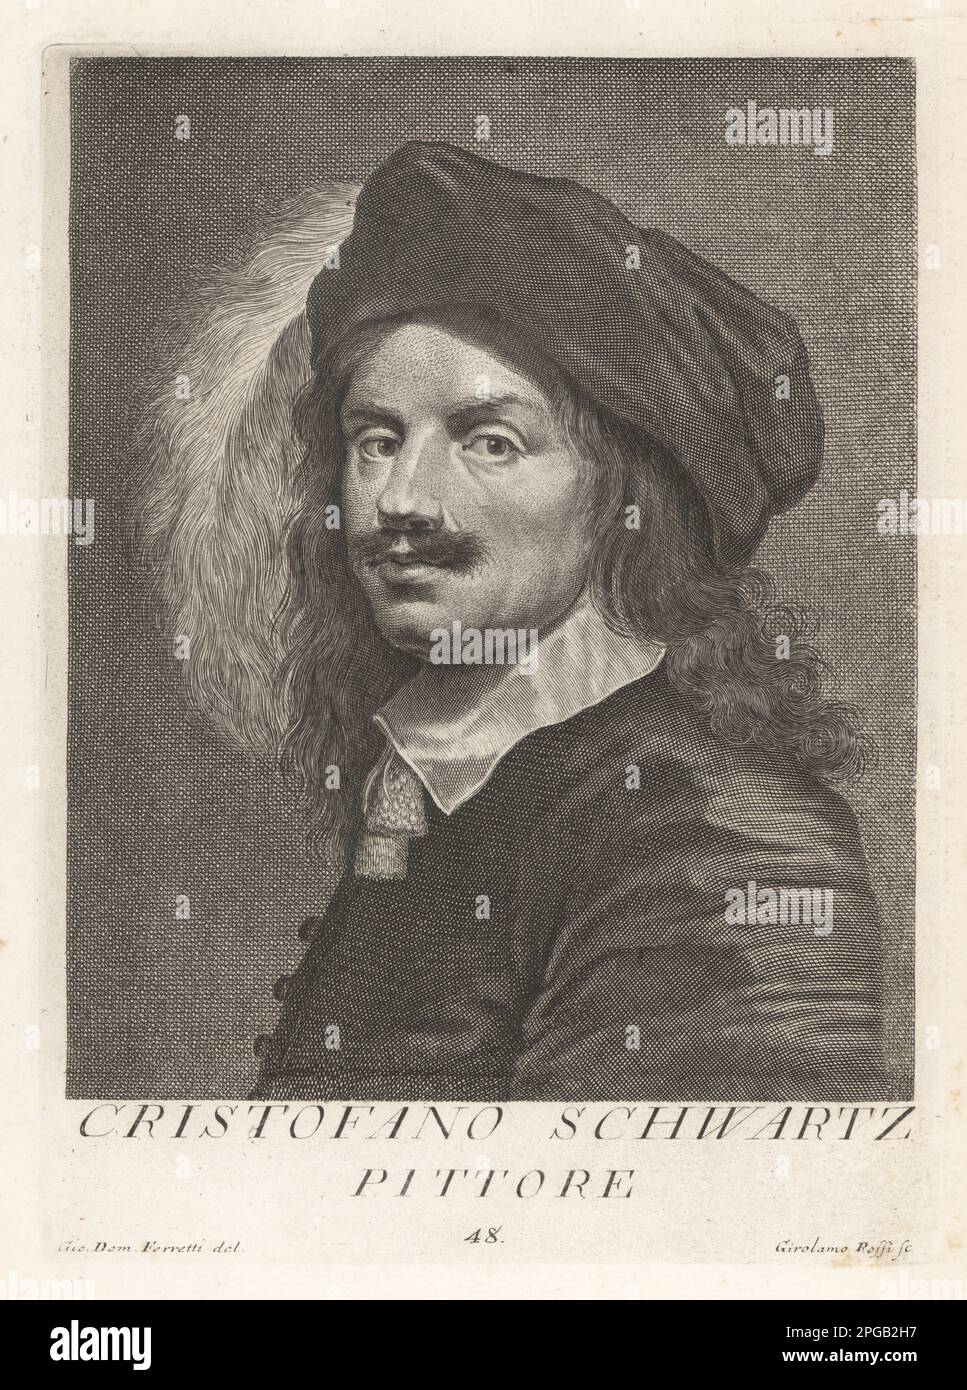 Christoph Schwartz, called the German Raphael, born in Ingolstadt, studied in Venice, returned to become court painter to the Elector of Bavaria, 1550-1597. Cristofano Schwartz, Pittore. Copperplate engraving by Girolamo Rossi after Giovanni Domenico Ferretti after a self portrait by the artist from Francesco Moucke's Museo Florentino (Museum Florentinum), Serie di Ritratti de Pittori (Series of Portraits of Painters) stamperia Mouckiana, Florence, 1752-62. Stock Photo